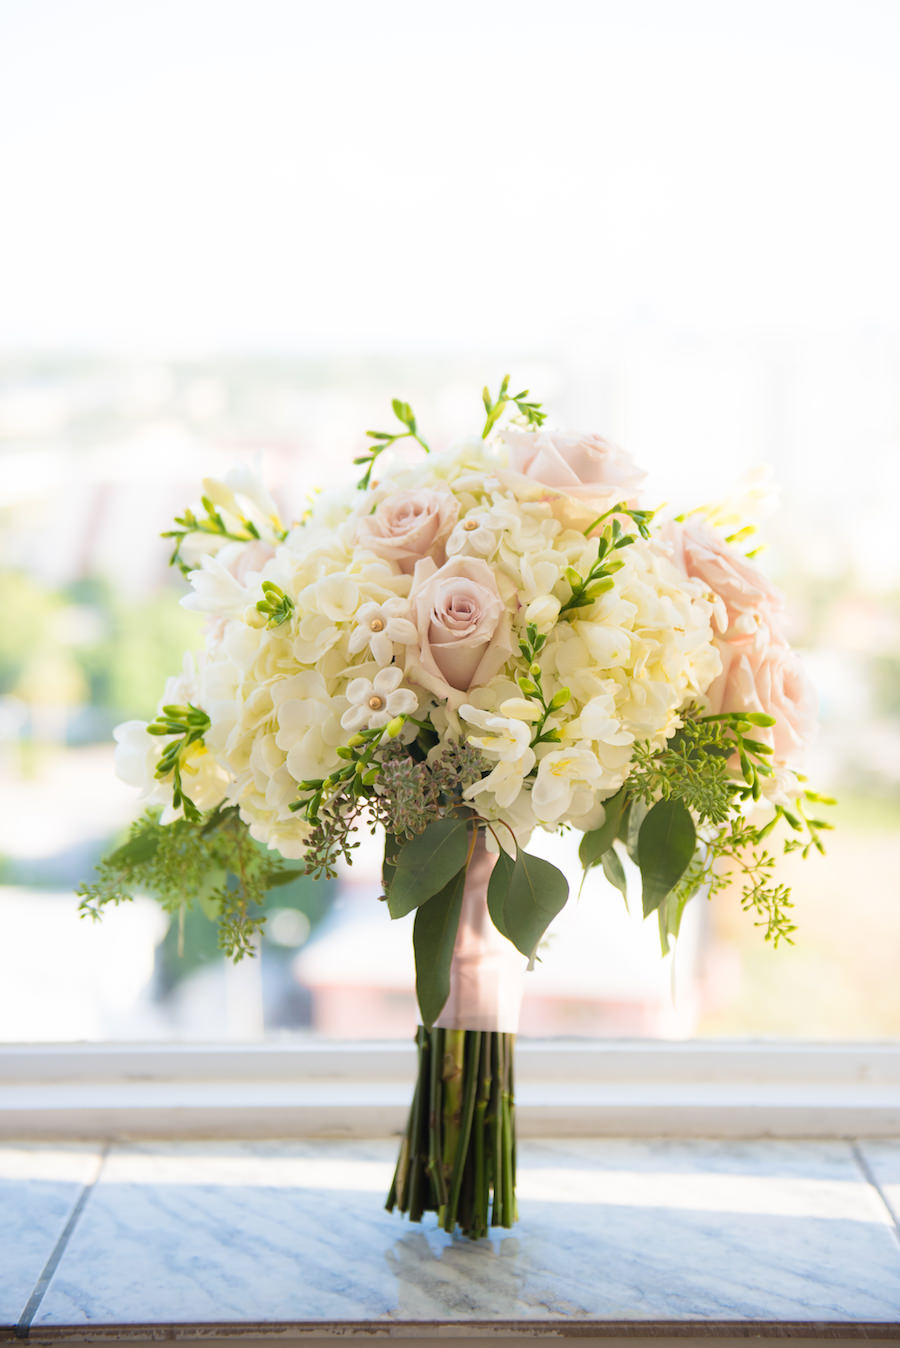 Ivory Hydrangeas and Blush Pink Roses with Greenery Wedding Bouquet with Pink Satin Ribbon